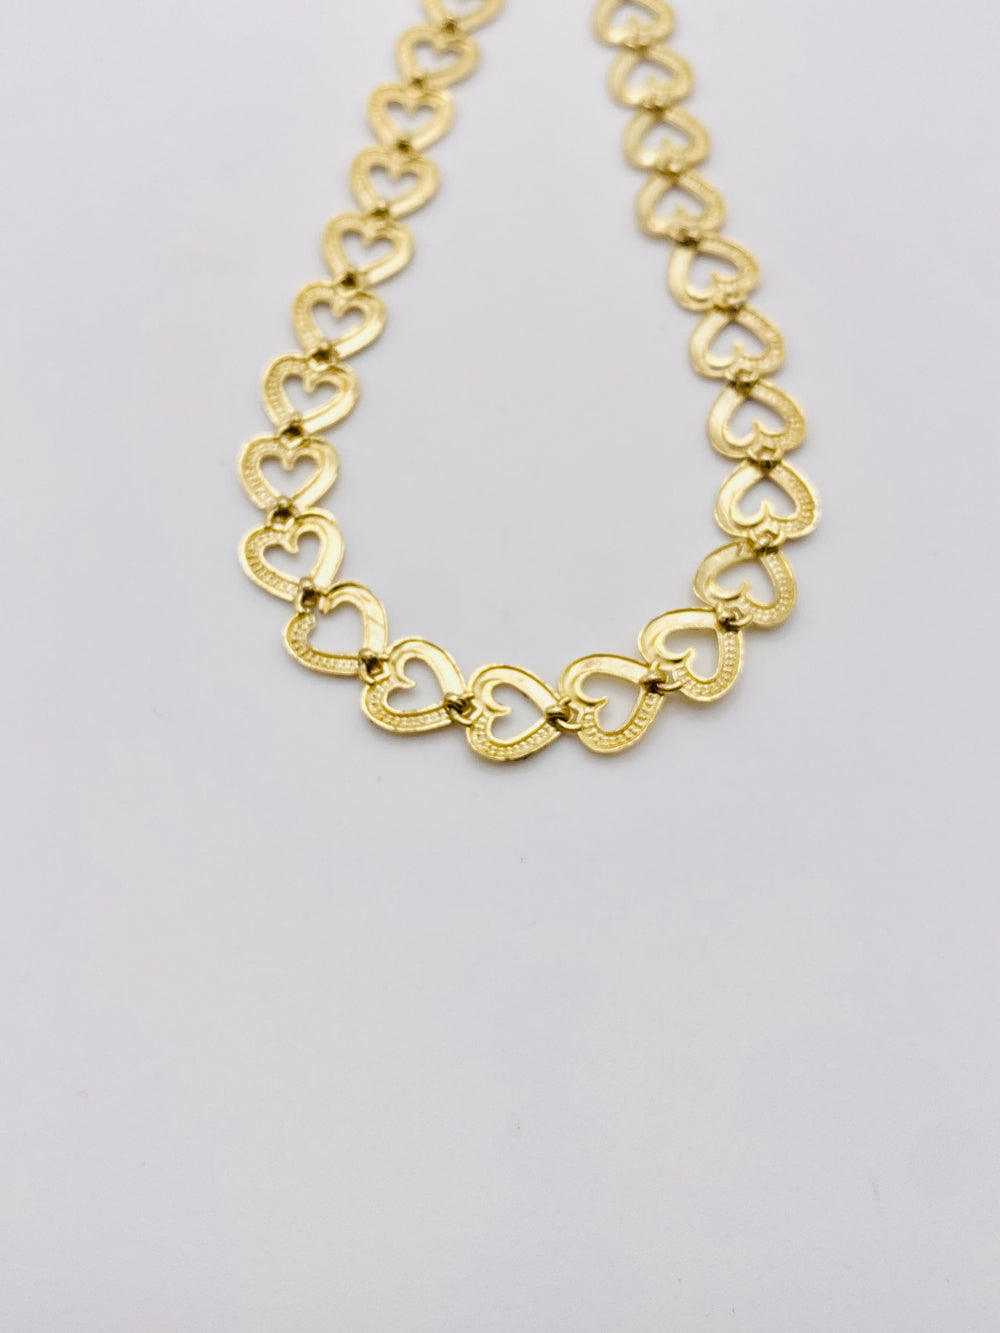 Real 10KT Gold Ladies Bracelet 7 Inches